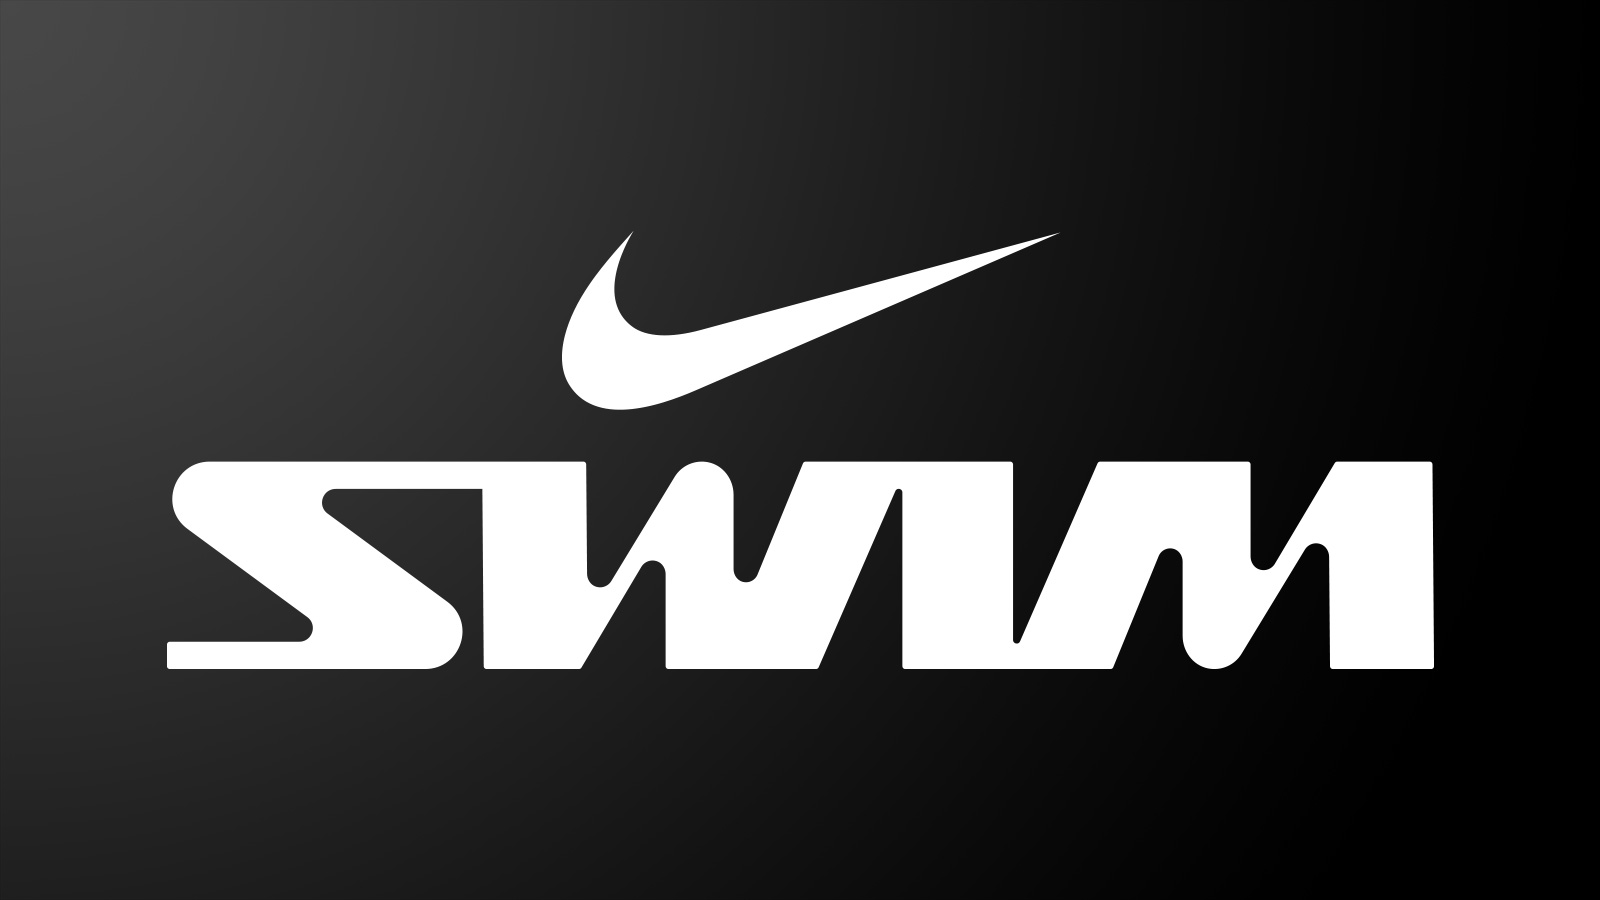 Nike Swim is a division of the multinational corporation Nike Inc.